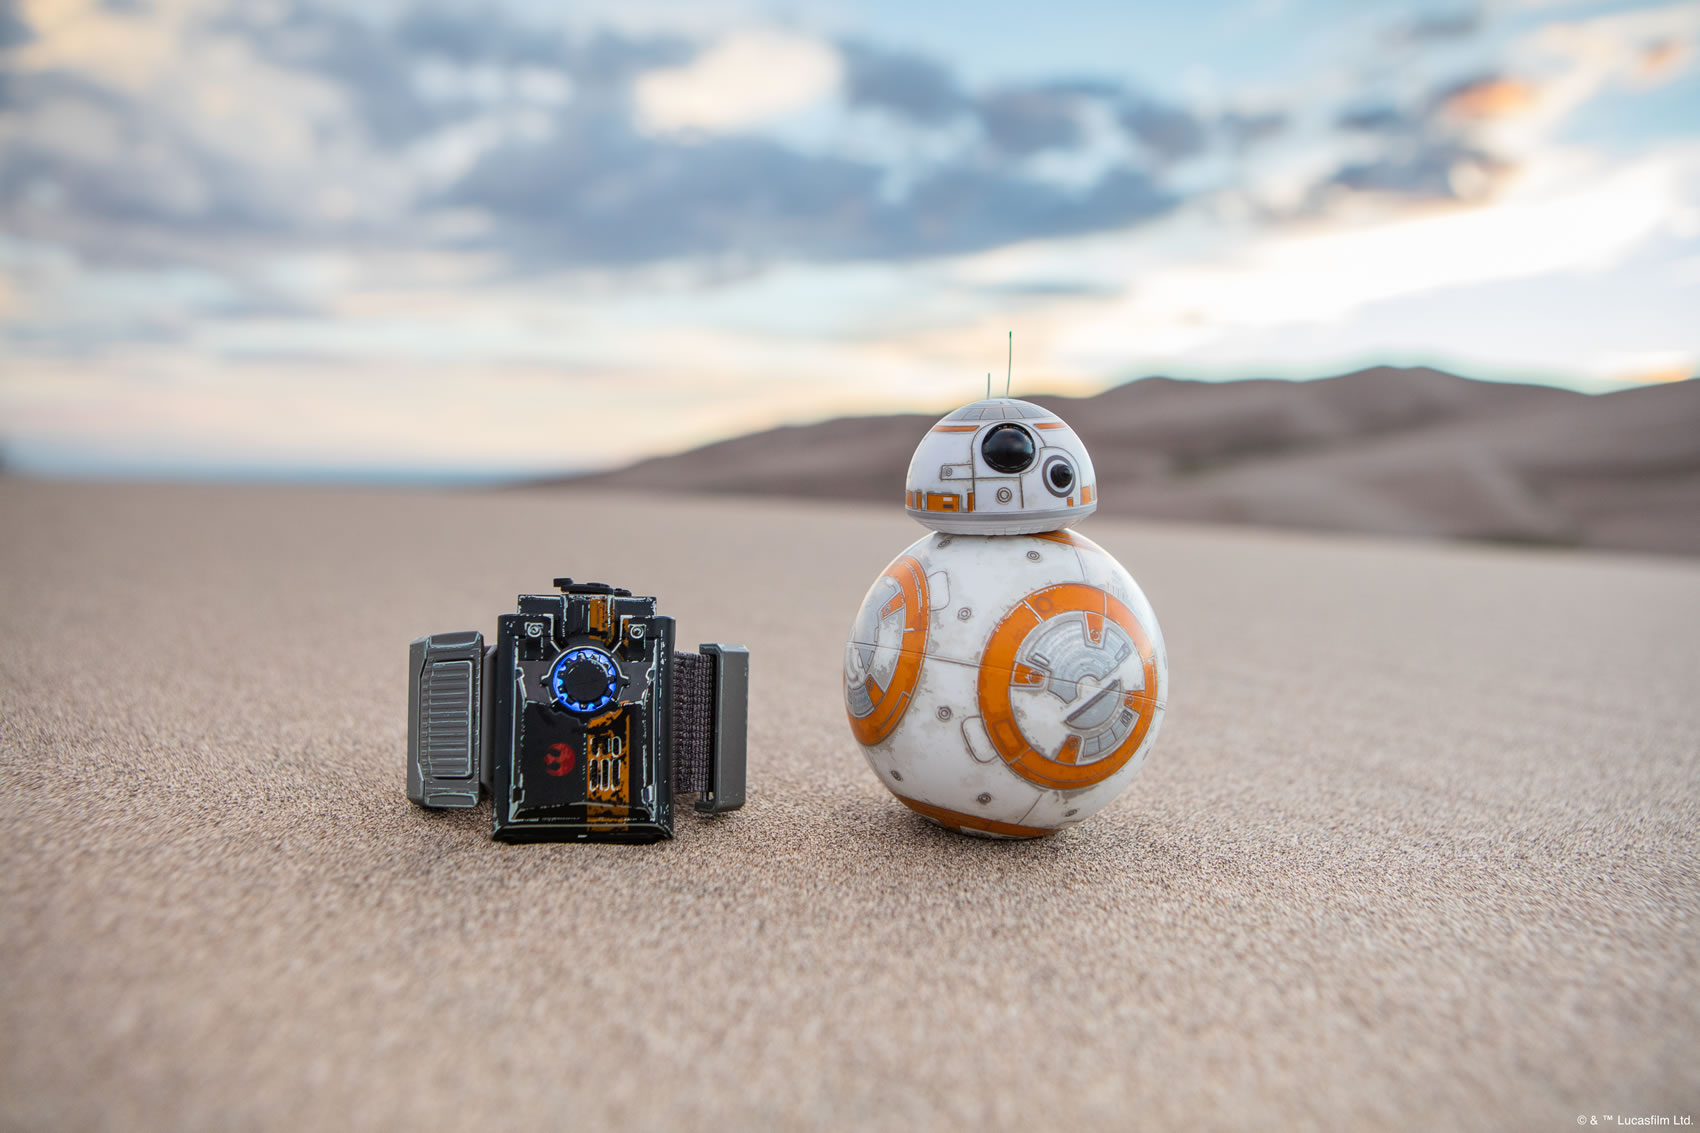 Bringing home the ‘NOW’ generation of Robotics -Sphero's BB-8 and Force Band - image courtesy Sphero © & ™ Lucasfilm Ltd.